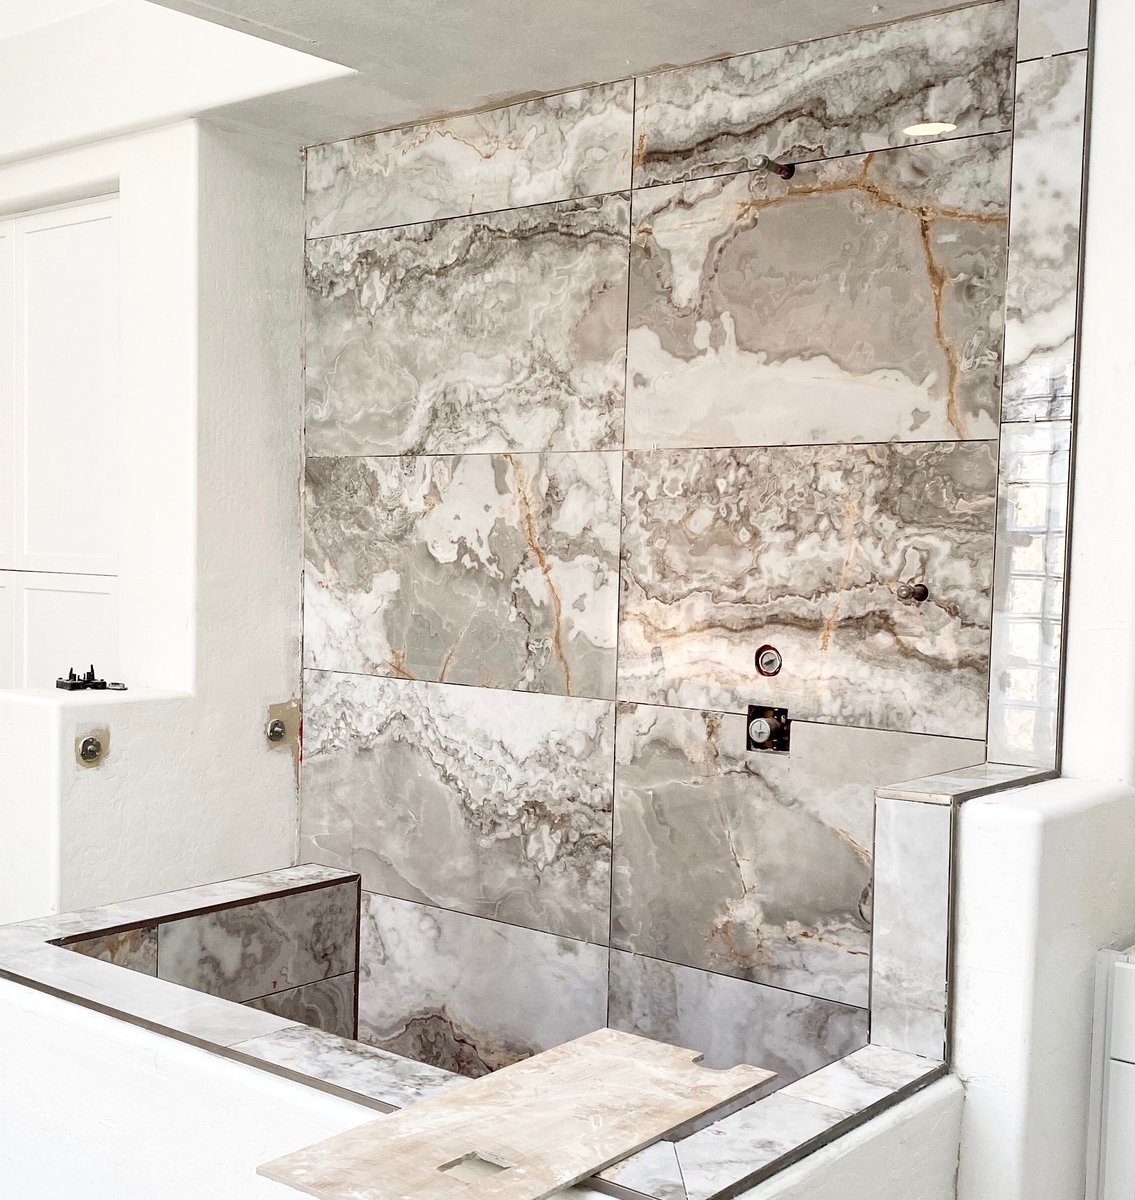 This tile in the master bathroom is sure to make a statement! WOW. #topcompdesign
.
.
.

.
.
.
#topcomp #azrealestate #topdollar #sellformore #phoenixrealestate #scottsdalerealestate #renovations #updatetosell #renovatetosell